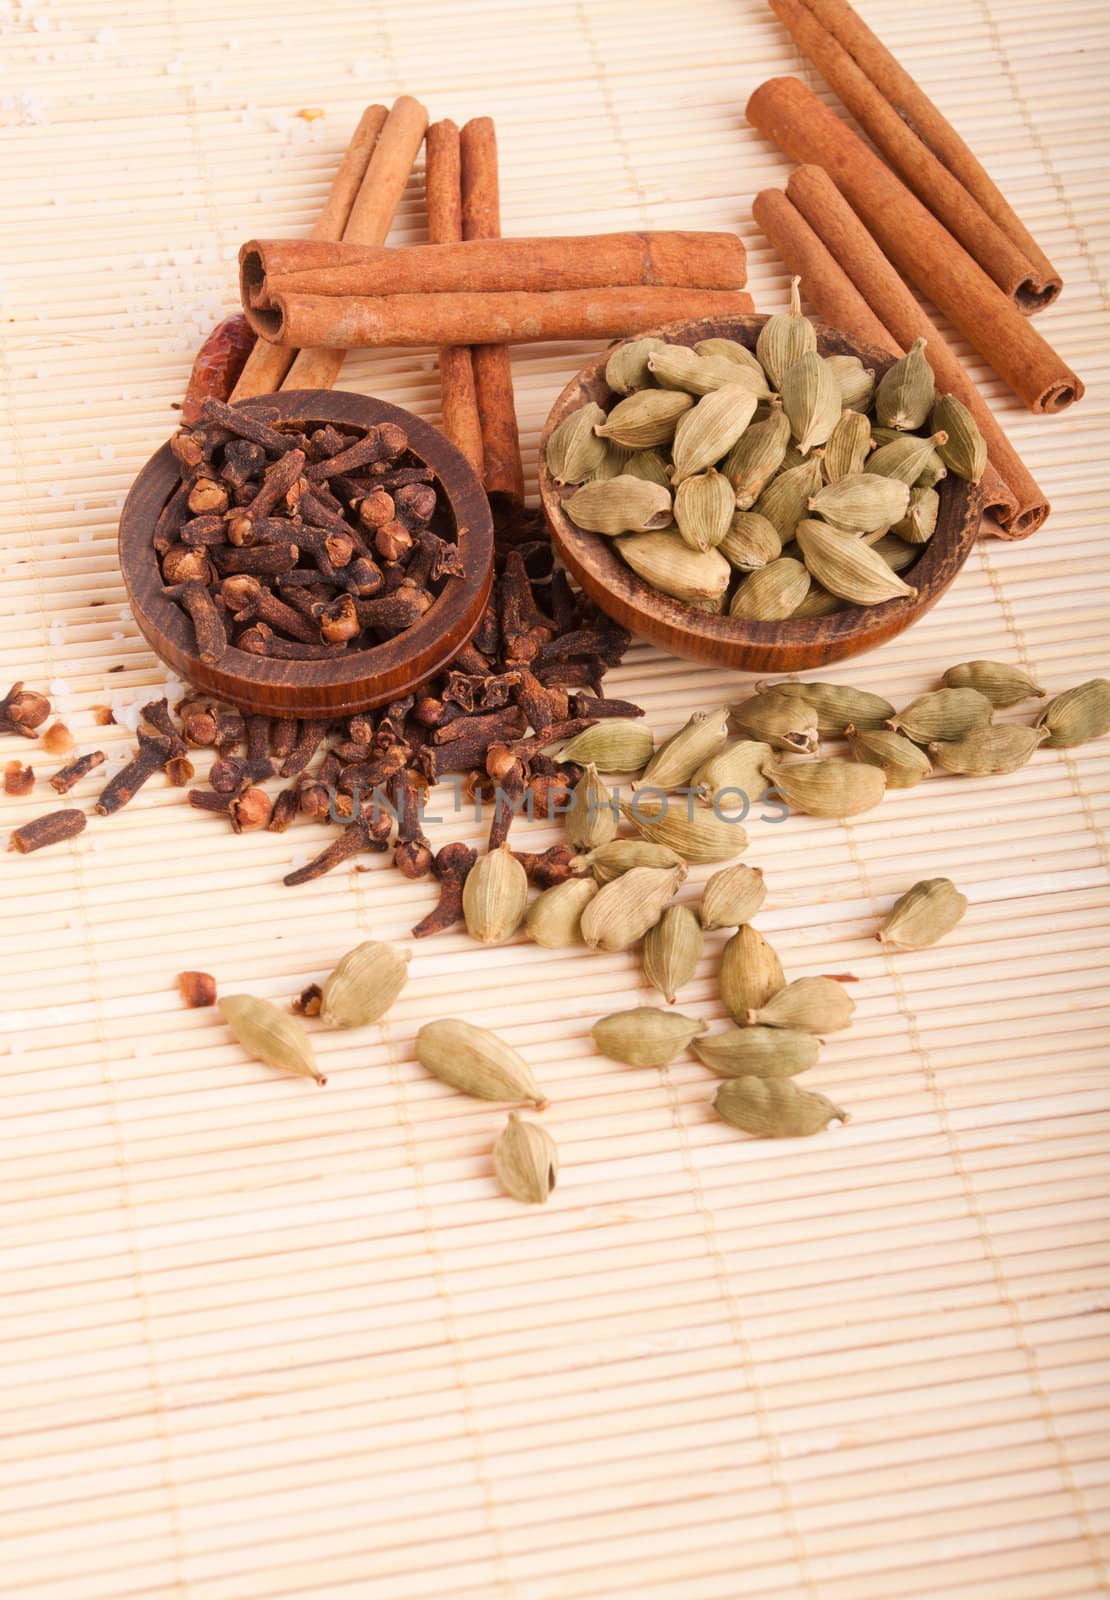 Cardamom pods and cloves by luissantos84